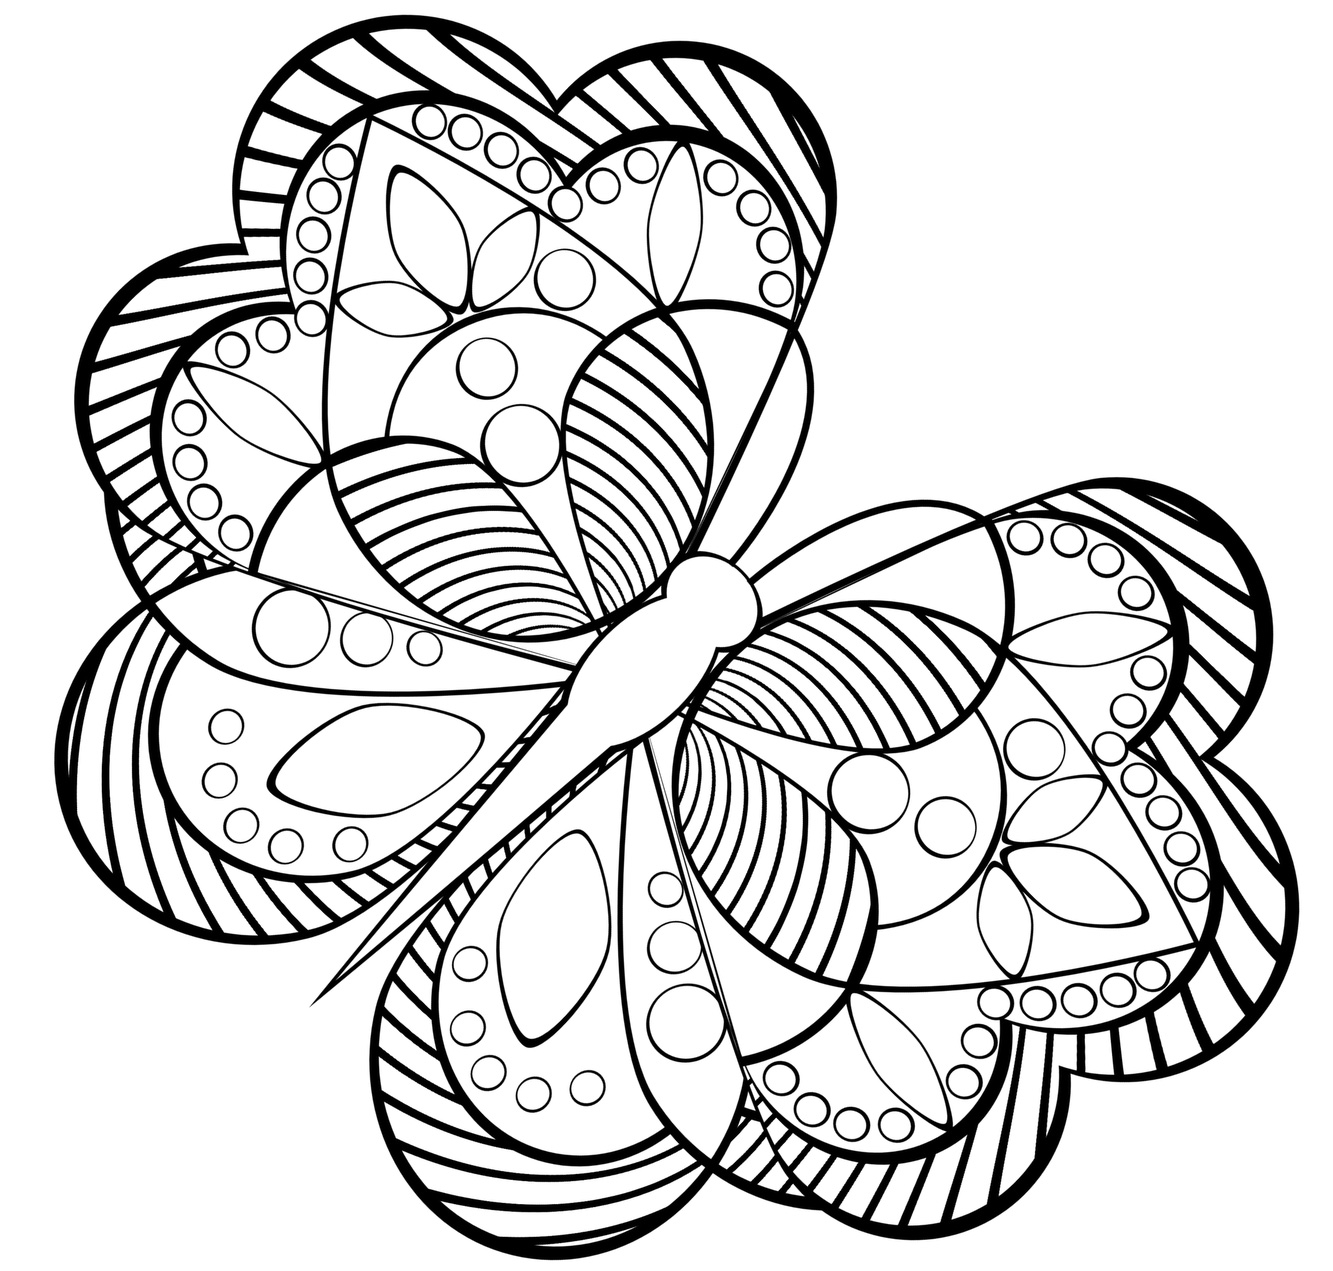 New Stress Free Coloring Pages for Adult